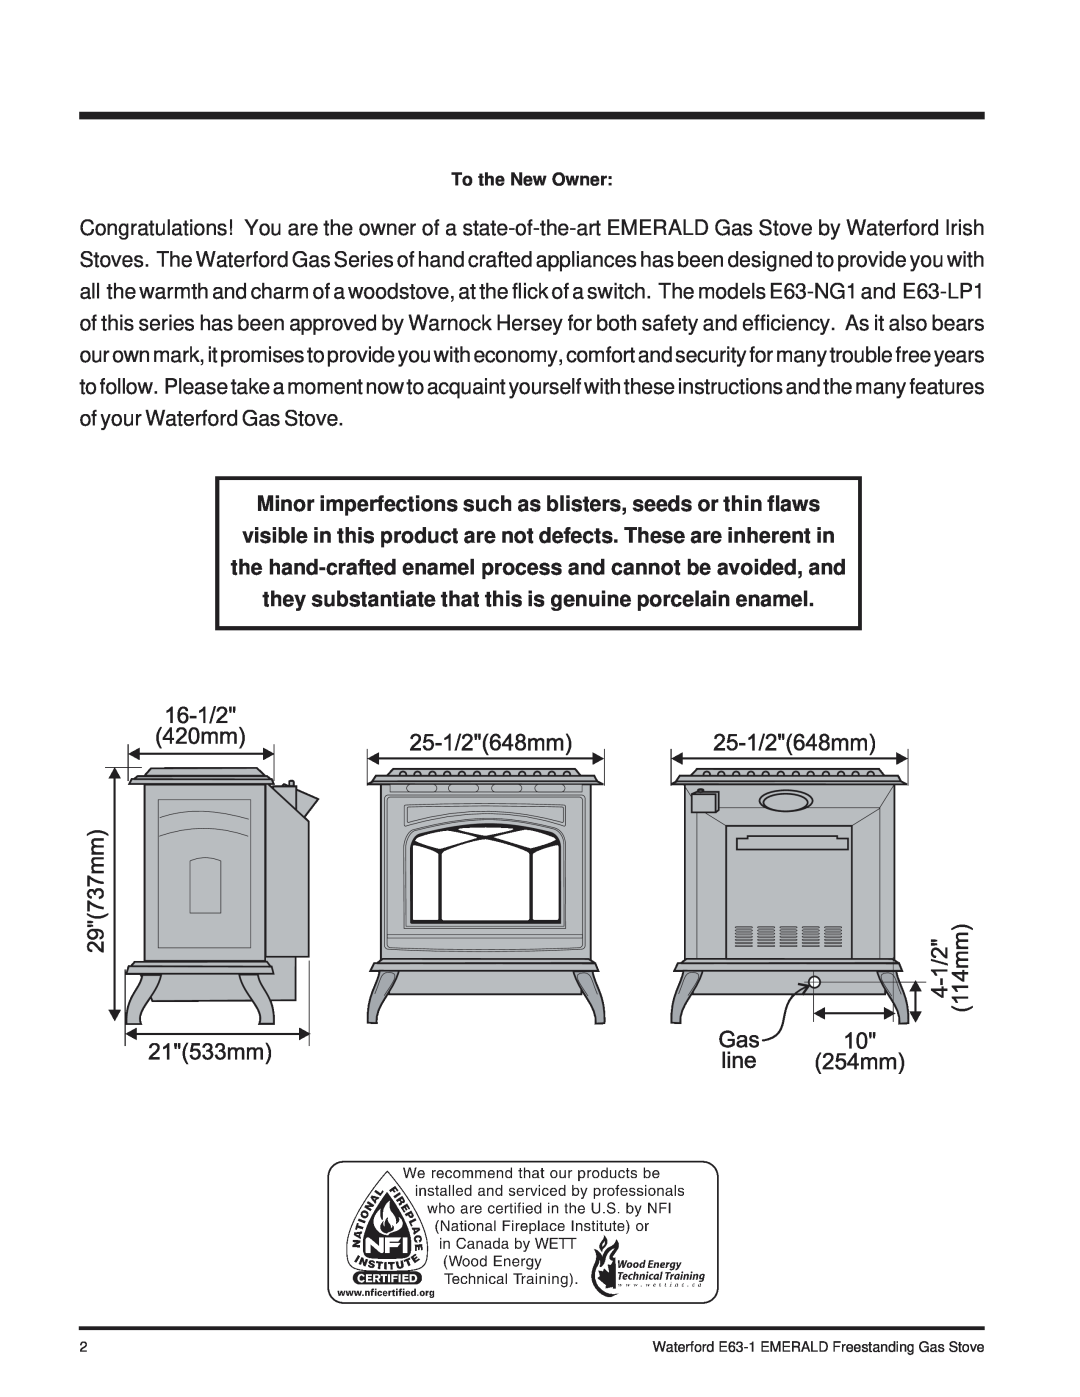 Waterford Appliances E63-NG1 installation manual To the New Owner, Waterford E63-1EMERALD Freestanding Gas Stove 